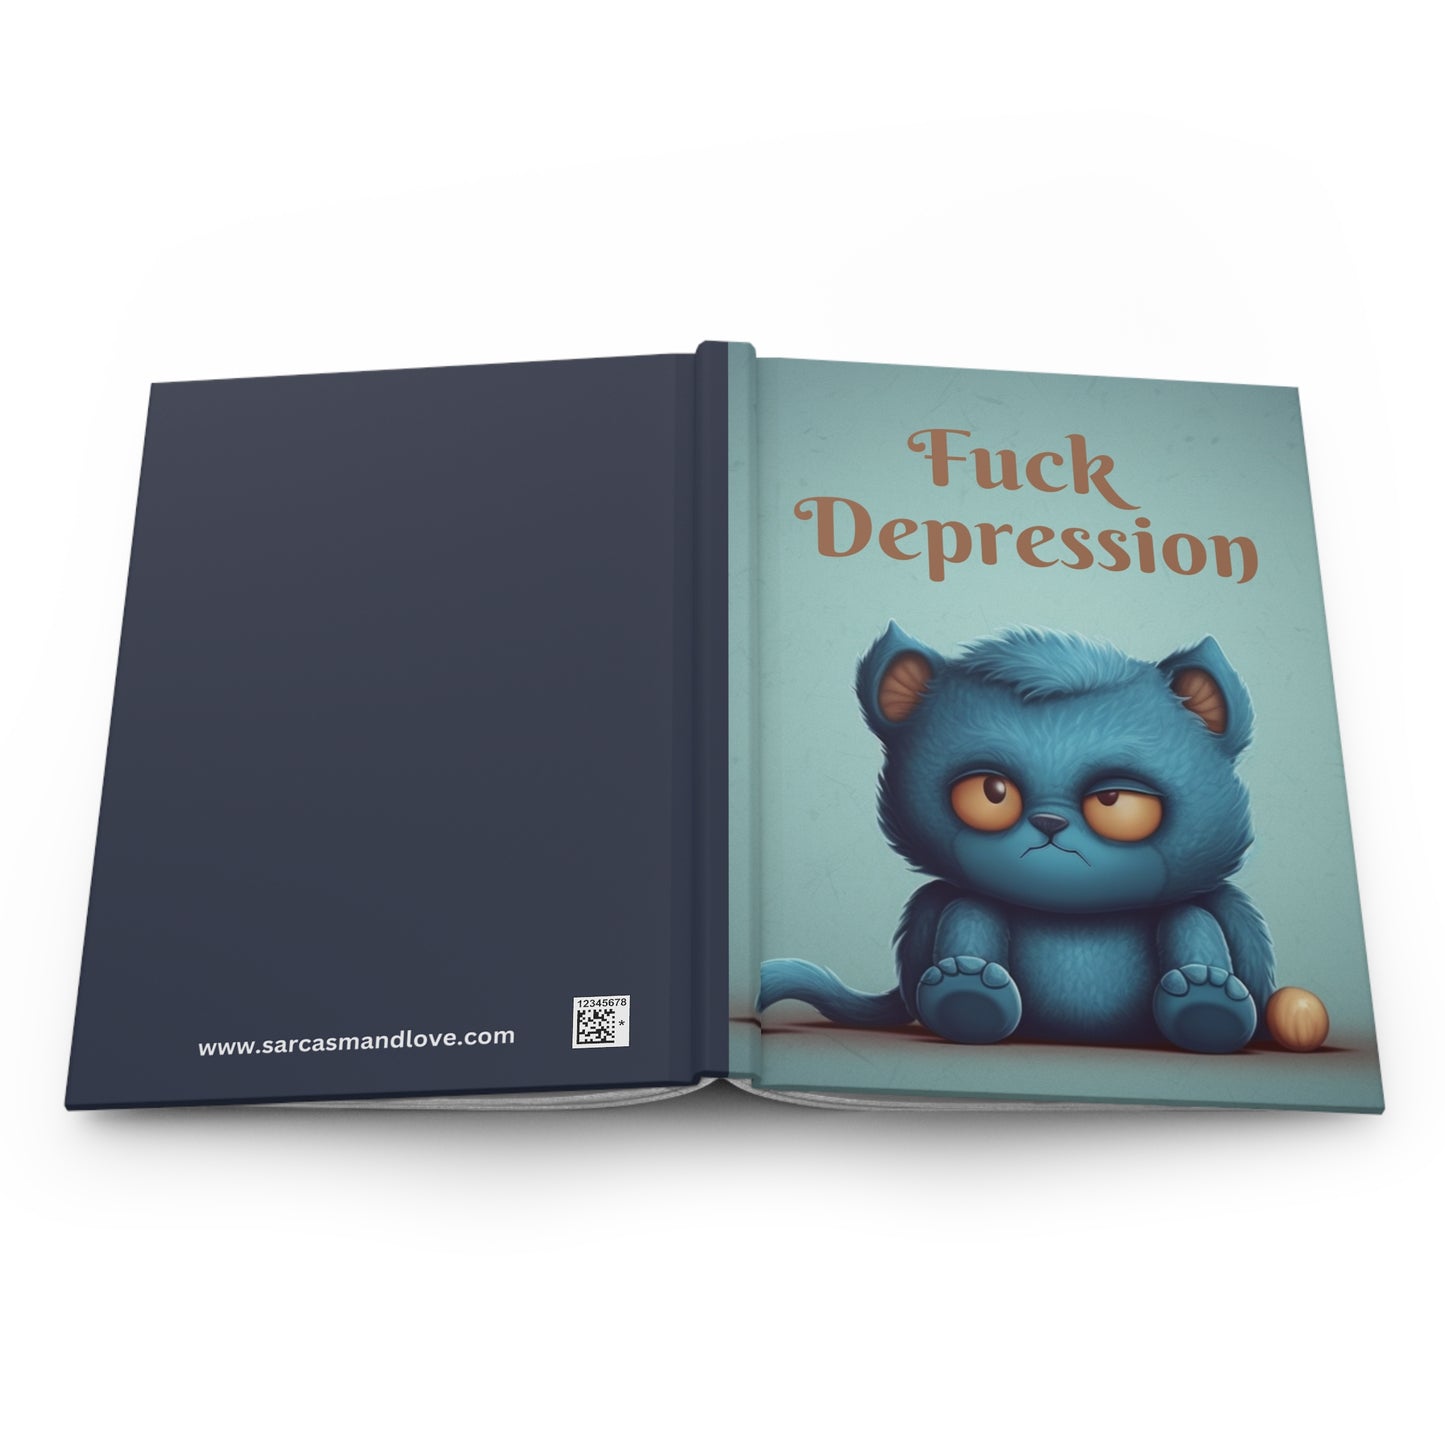 Uplifting Blue Cat Notebook Journal - Conquer Depression, Hardcover Journal for Mindfulness & Wellness, Inspiring Daily Self-Care Diary